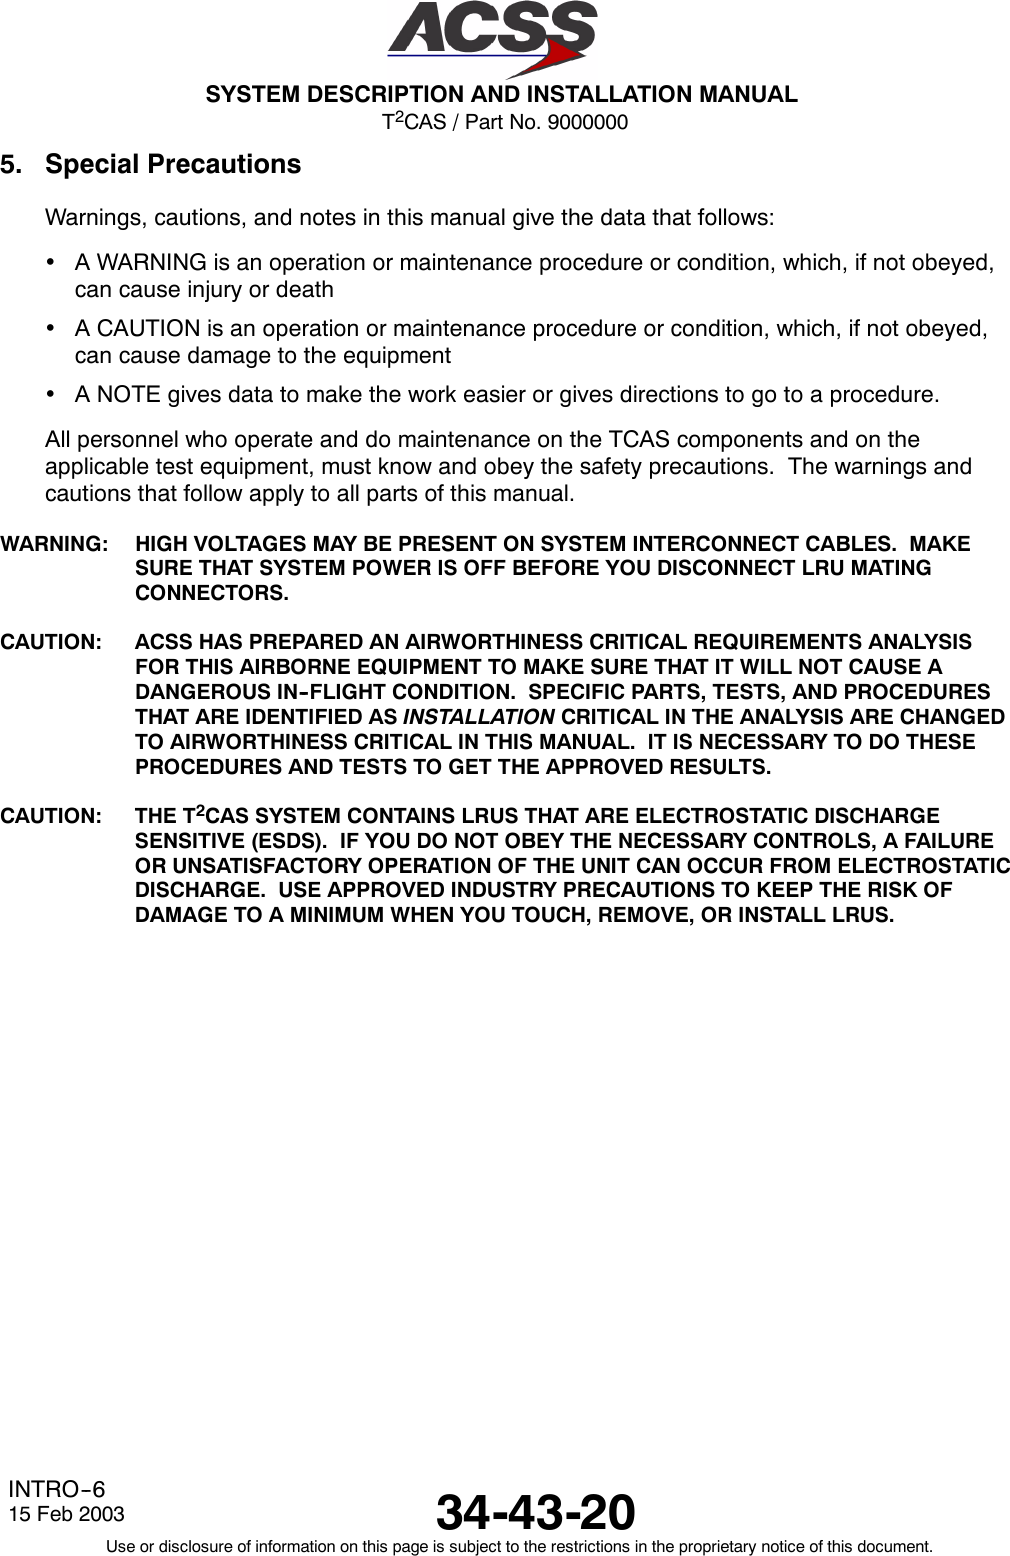 T2CAS / Part No. 9000000SYSTEM DESCRIPTION AND INSTALLATION MANUAL34-43-2015 Feb 2003Use or disclosure of information on this page is subject to the restrictions in the proprietary notice of this document.INTRO--65. Special PrecautionsWarnings, cautions, and notes in this manual give the data that follows:•A WARNING is an operation or maintenance procedure or condition, which, if not obeyed,can cause injury or death•A CAUTION is an operation or maintenance procedure or condition, which, if not obeyed,can cause damage to the equipment•A NOTE gives data to make the work easier or gives directions to go to a procedure.All personnel who operate and do maintenance on the TCAS components and on theapplicable test equipment, must know and obey the safety precautions. The warnings andcautions that follow apply to all parts of this manual.WARNING: HIGH VOLTAGES MAY BE PRESENT ON SYSTEM INTERCONNECT CABLES. MAKESURE THAT SYSTEM POWER IS OFF BEFORE YOU DISCONNECT LRU MATINGCONNECTORS.CAUTION: ACSS HAS PREPARED AN AIRWORTHINESS CRITICAL REQUIREMENTS ANALYSISFOR THIS AIRBORNE EQUIPMENT TO MAKE SURE THAT IT WILL NOT CAUSE ADANGEROUS IN--FLIGHT CONDITION. SPECIFIC PARTS, TESTS, AND PROCEDURESTHAT ARE IDENTIFIED AS INSTALLATION CRITICAL IN THE ANALYSIS ARE CHANGEDTO AIRWORTHINESS CRITICAL IN THIS MANUAL. IT IS NECESSARY TO DO THESEPROCEDURES AND TESTS TO GET THE APPROVED RESULTS.CAUTION: THE T2CAS SYSTEM CONTAINS LRUS THAT ARE ELECTROSTATIC DISCHARGESENSITIVE (ESDS). IF YOU DO NOT OBEY THE NECESSARY CONTROLS, A FAILUREOR UNSATISFACTORY OPERATION OF THE UNIT CAN OCCUR FROM ELECTROSTATICDISCHARGE. USE APPROVED INDUSTRY PRECAUTIONS TO KEEP THE RISK OFDAMAGE TO A MINIMUM WHEN YOU TOUCH, REMOVE, OR INSTALL LRUS.